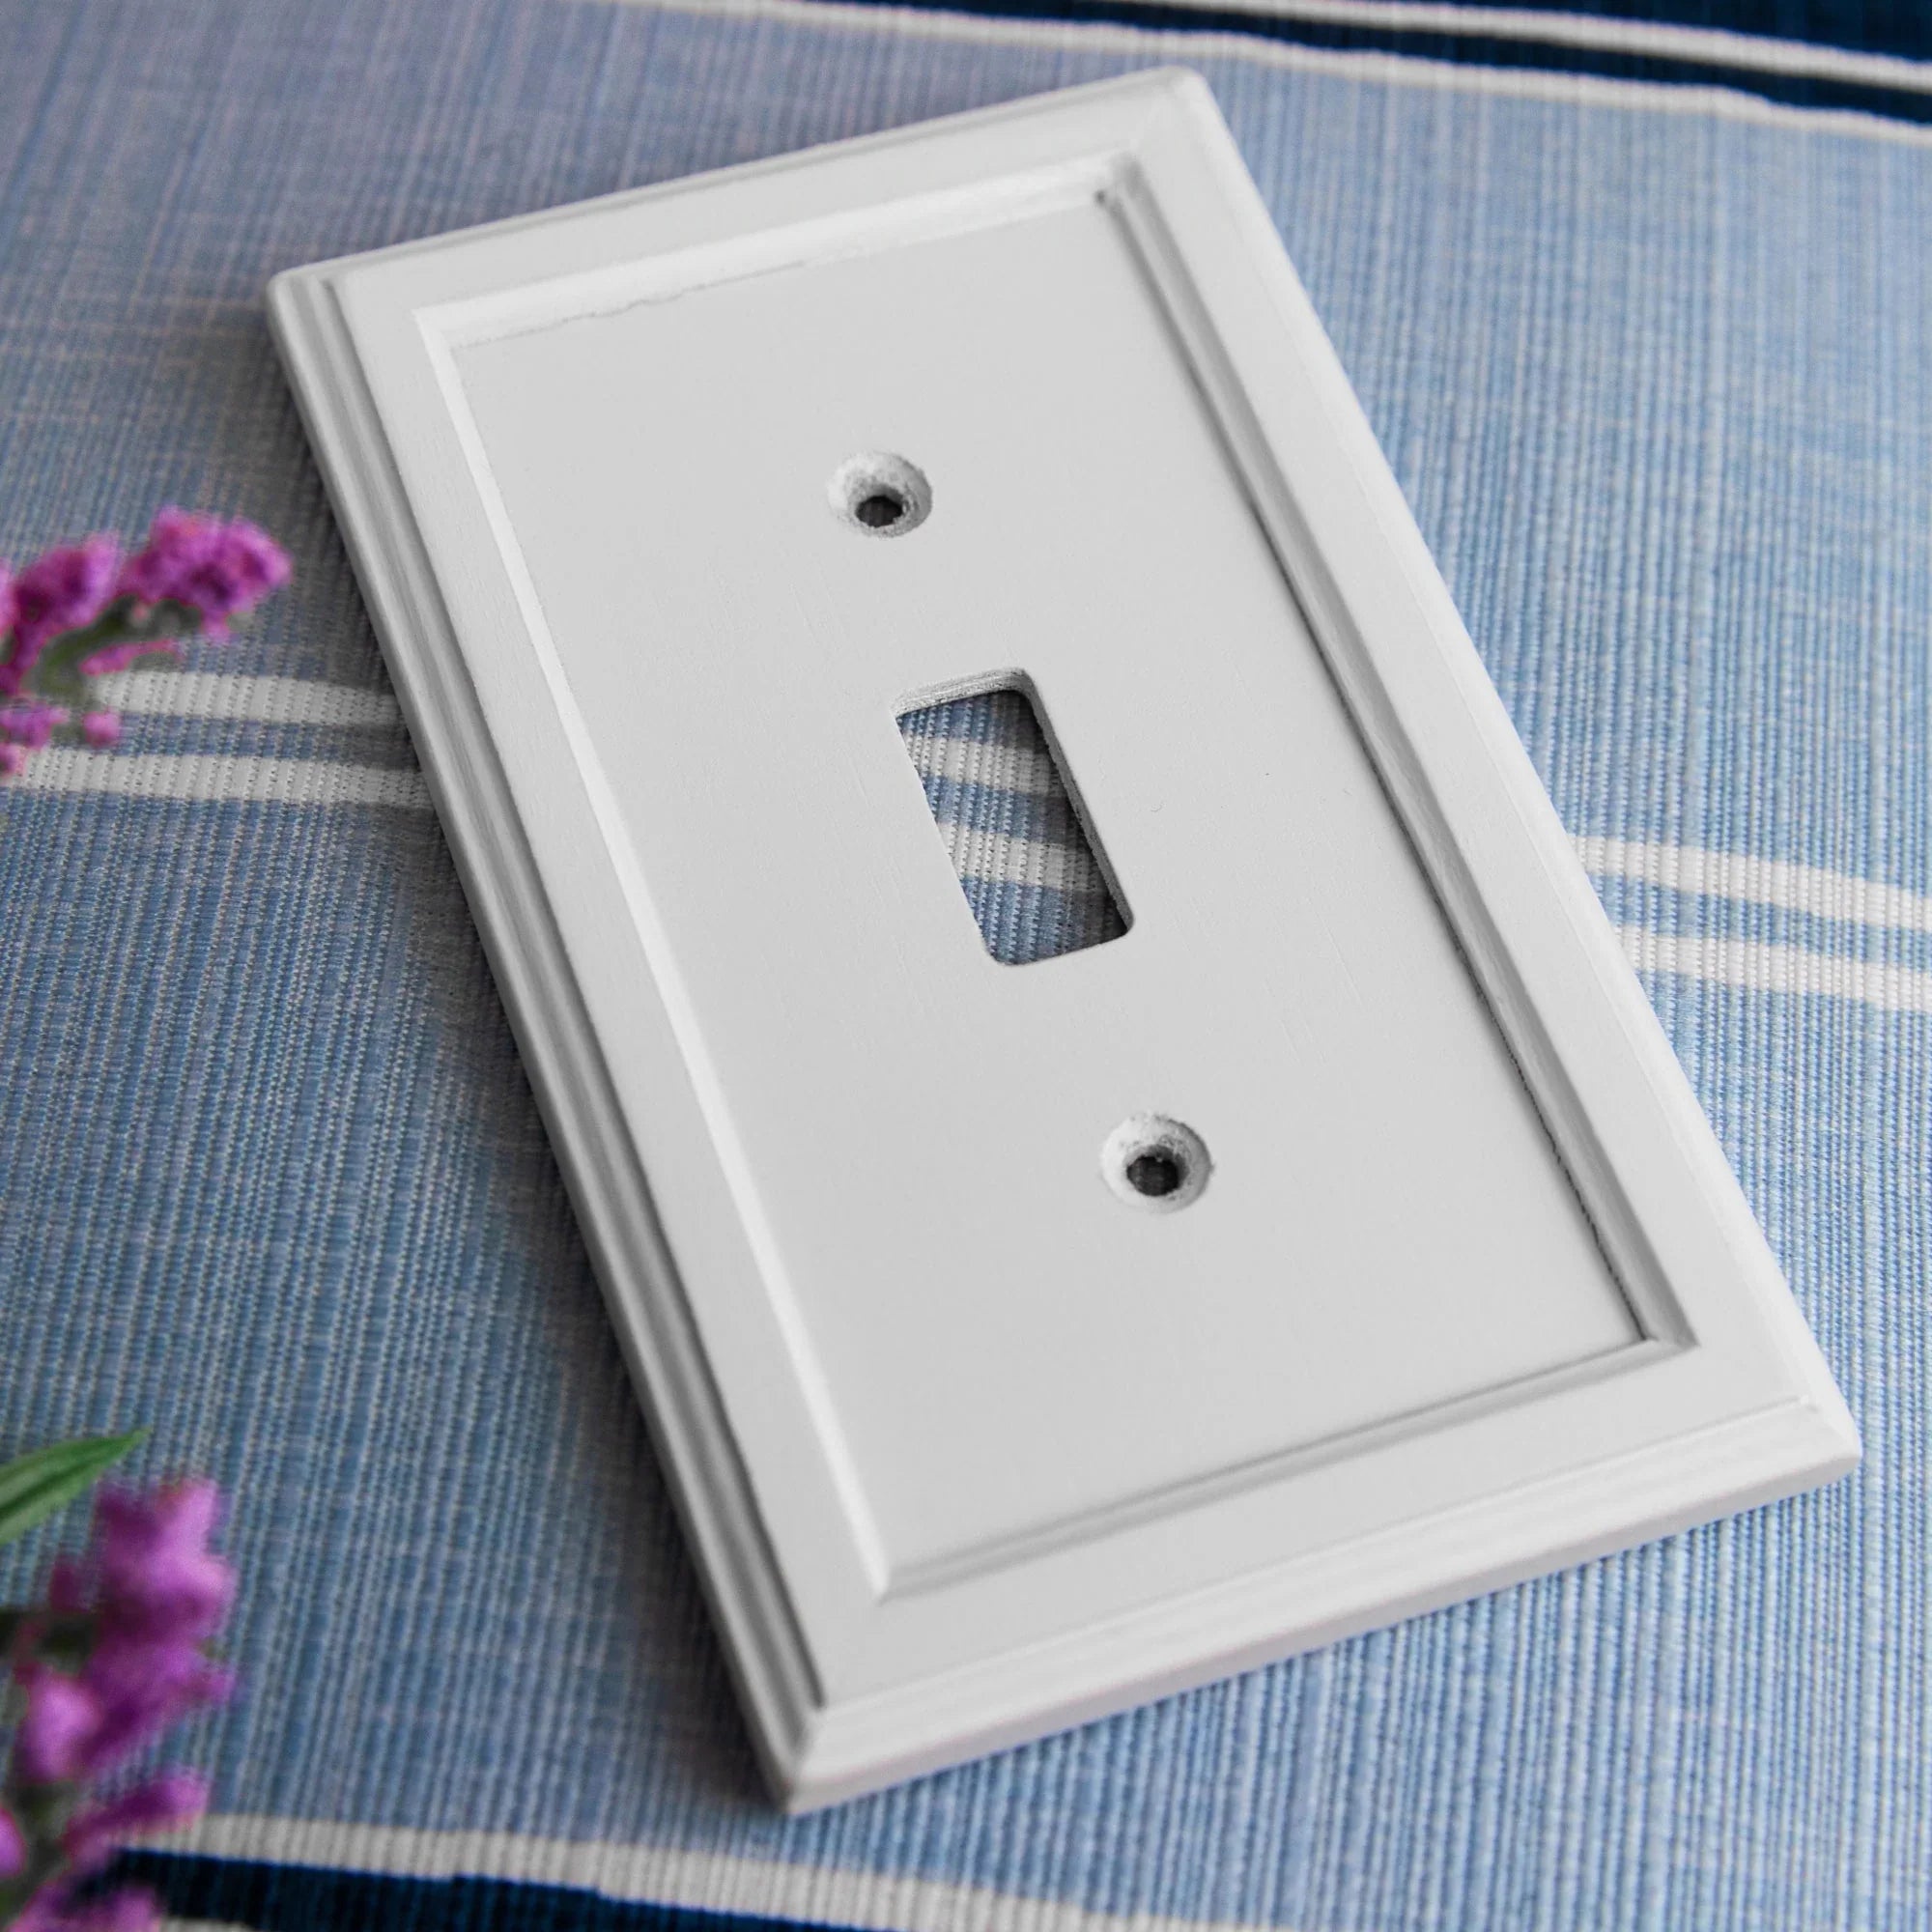 Elly White Wood - 4 Toggle Wallplate